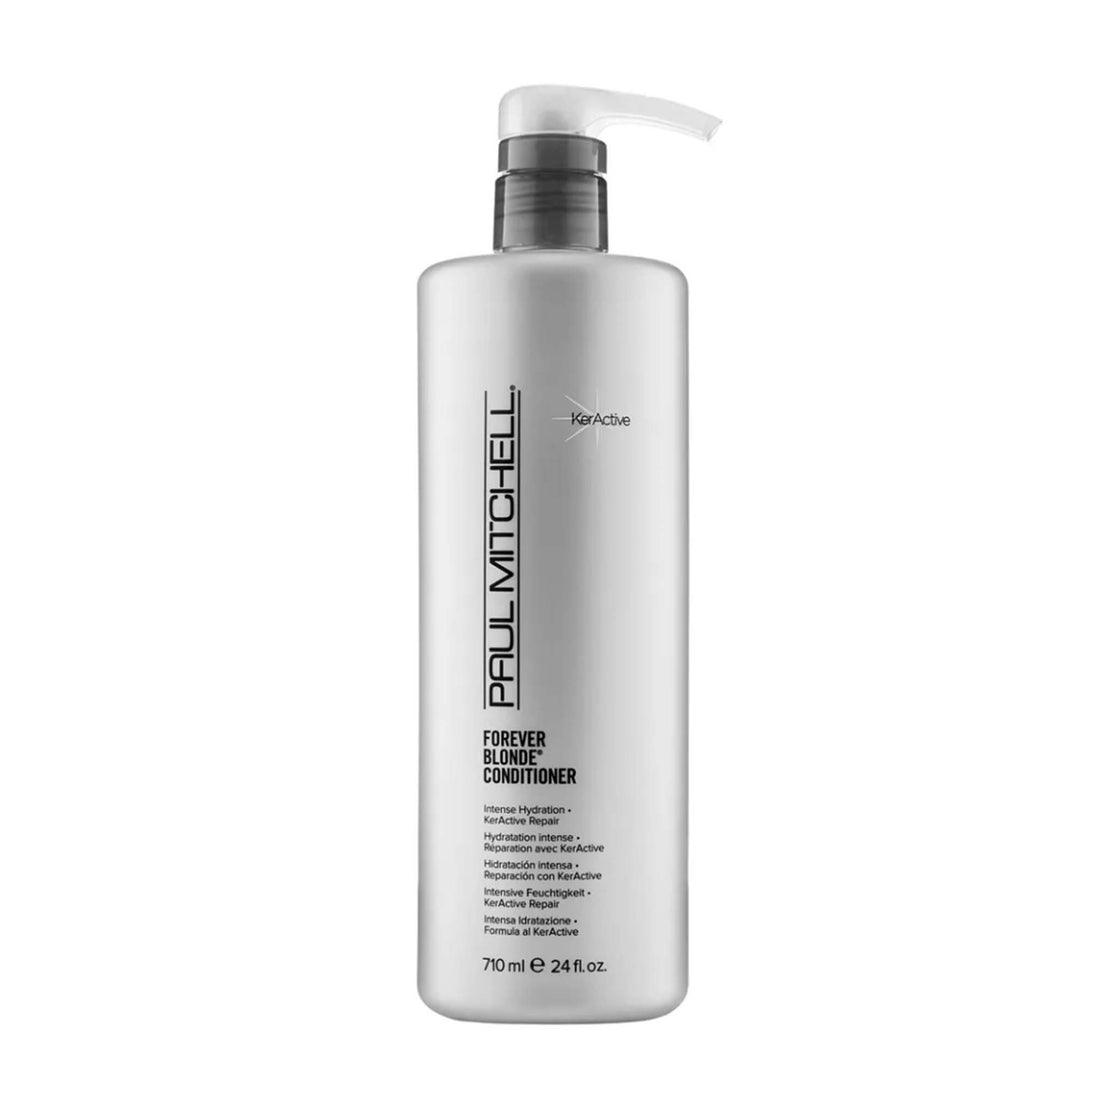 Paul Mitchell Forever Blonde Conditioner 24oz